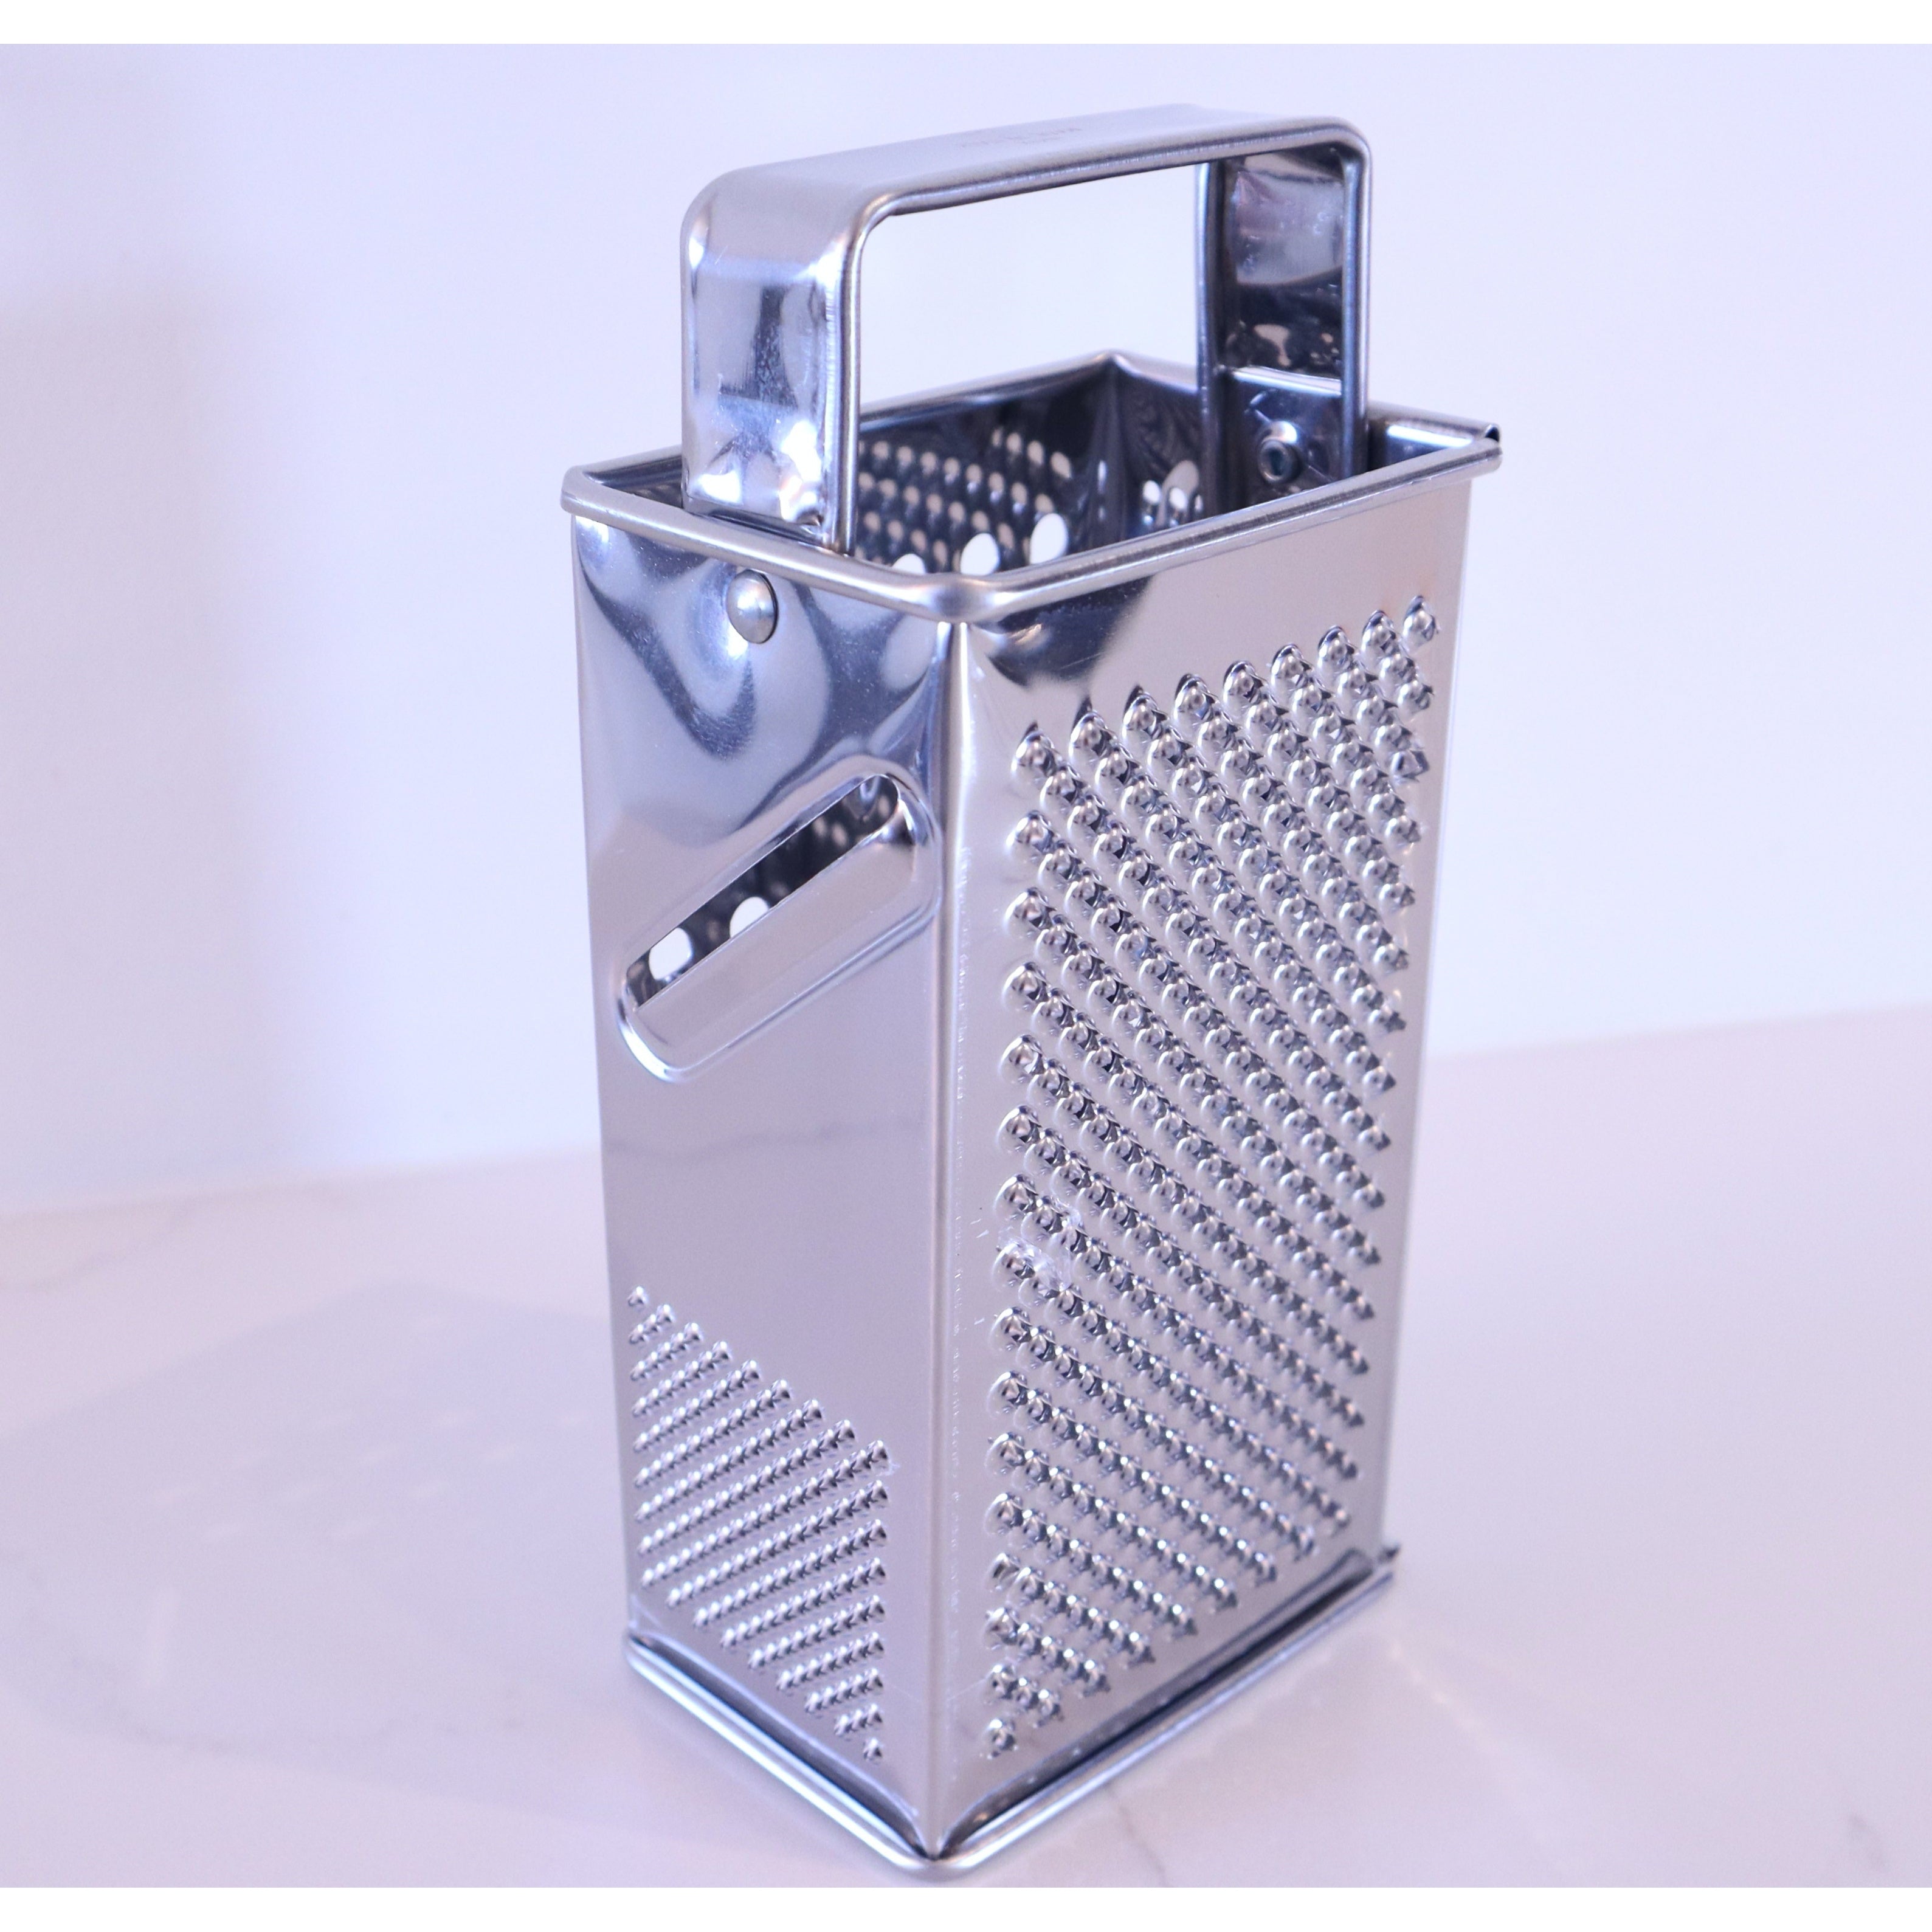 Eppicotispai Stainless Steel Box Cheese Grater 18 cm Side View